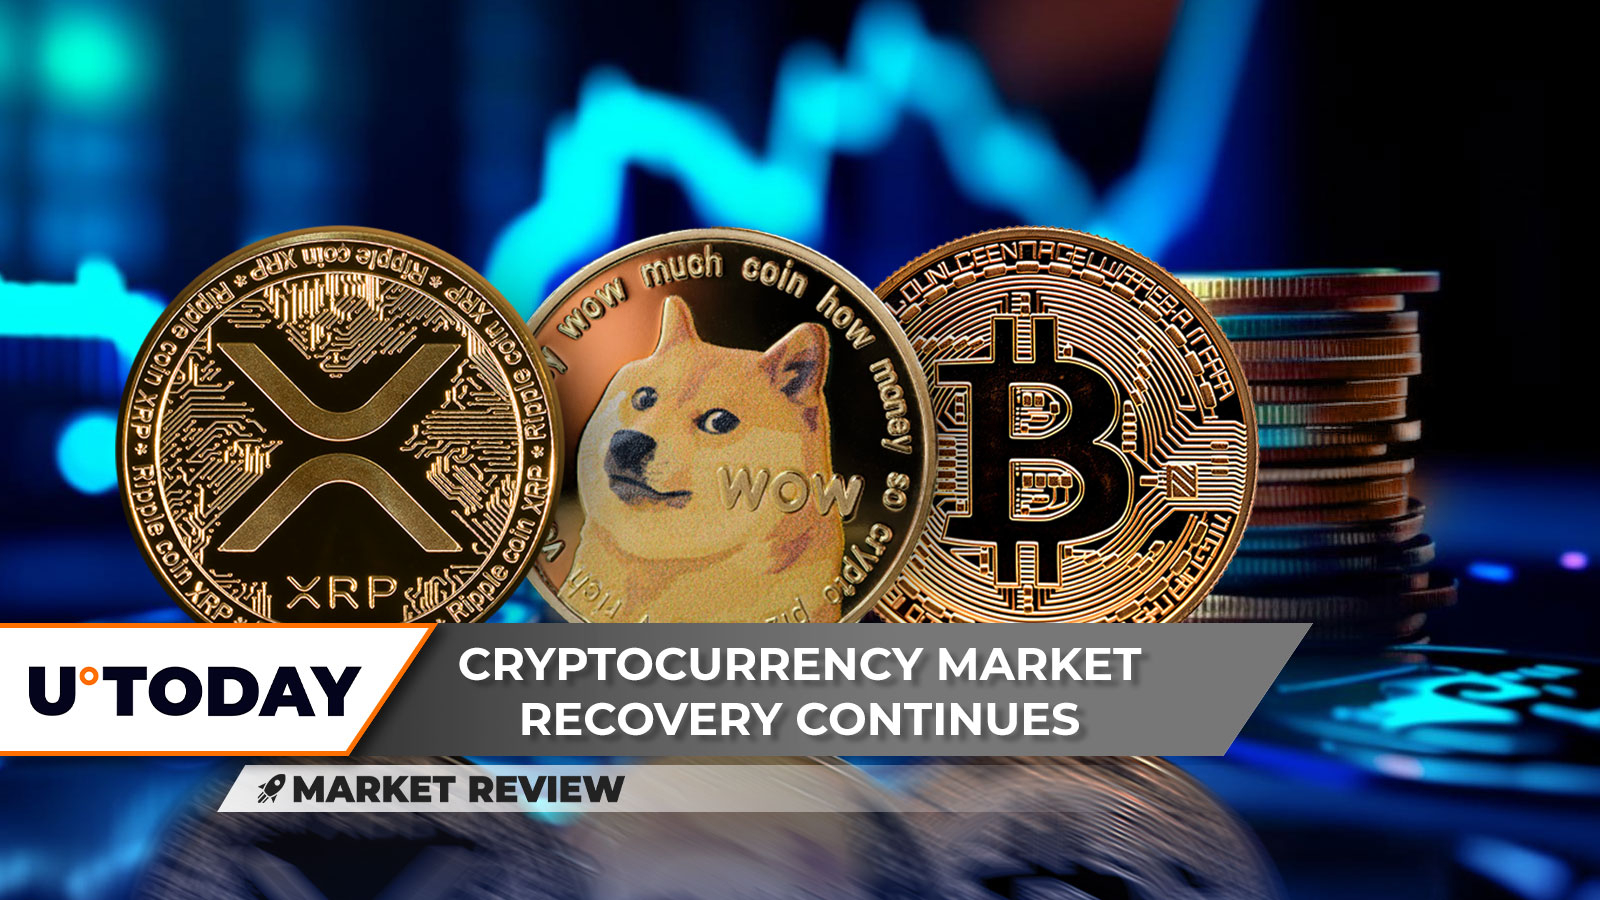 XRP Death Cross Fully Confirmed, Dogecoin (DOGE) About to Get Squeezed, Bitcoin (BTC) Now Aims at $55,000